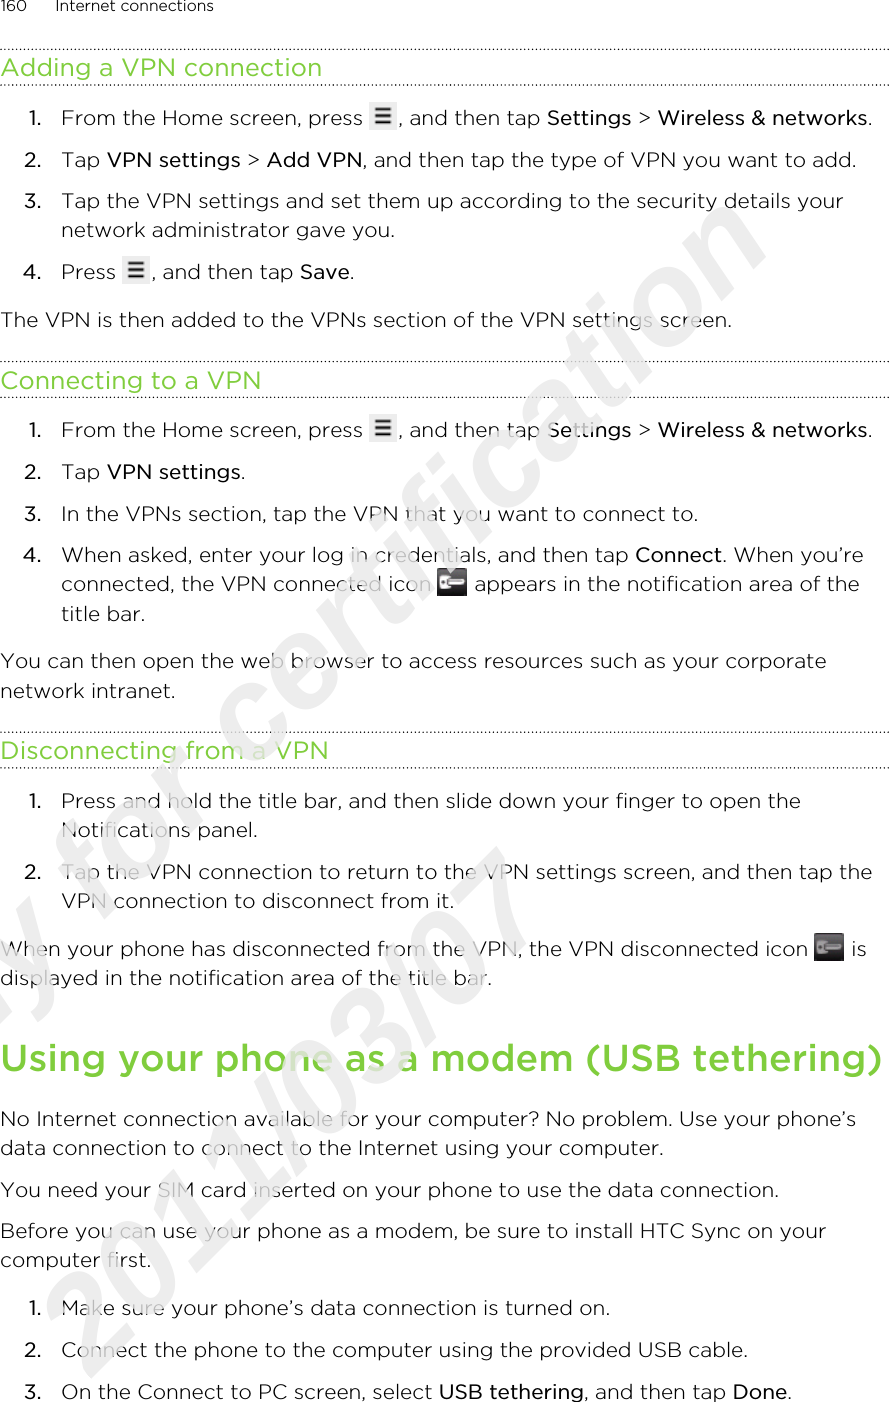 Adding a VPN connection1. From the Home screen, press  , and then tap Settings &gt; Wireless &amp; networks.2. Tap VPN settings &gt; Add VPN, and then tap the type of VPN you want to add.3. Tap the VPN settings and set them up according to the security details yournetwork administrator gave you.4. Press  , and then tap Save.The VPN is then added to the VPNs section of the VPN settings screen.Connecting to a VPN1. From the Home screen, press  , and then tap Settings &gt; Wireless &amp; networks.2. Tap VPN settings.3. In the VPNs section, tap the VPN that you want to connect to.4. When asked, enter your log in credentials, and then tap Connect. When you’reconnected, the VPN connected icon   appears in the notification area of thetitle bar.You can then open the web browser to access resources such as your corporatenetwork intranet.Disconnecting from a VPN1. Press and hold the title bar, and then slide down your finger to open theNotifications panel.2. Tap the VPN connection to return to the VPN settings screen, and then tap theVPN connection to disconnect from it.When your phone has disconnected from the VPN, the VPN disconnected icon   isdisplayed in the notification area of the title bar.Using your phone as a modem (USB tethering)No Internet connection available for your computer? No problem. Use your phone’sdata connection to connect to the Internet using your computer.You need your SIM card inserted on your phone to use the data connection.Before you can use your phone as a modem, be sure to install HTC Sync on yourcomputer first.1. Make sure your phone’s data connection is turned on.2. Connect the phone to the computer using the provided USB cable.3. On the Connect to PC screen, select USB tethering, and then tap Done.160 Internet connectionsOnly for certification  2011/03/07